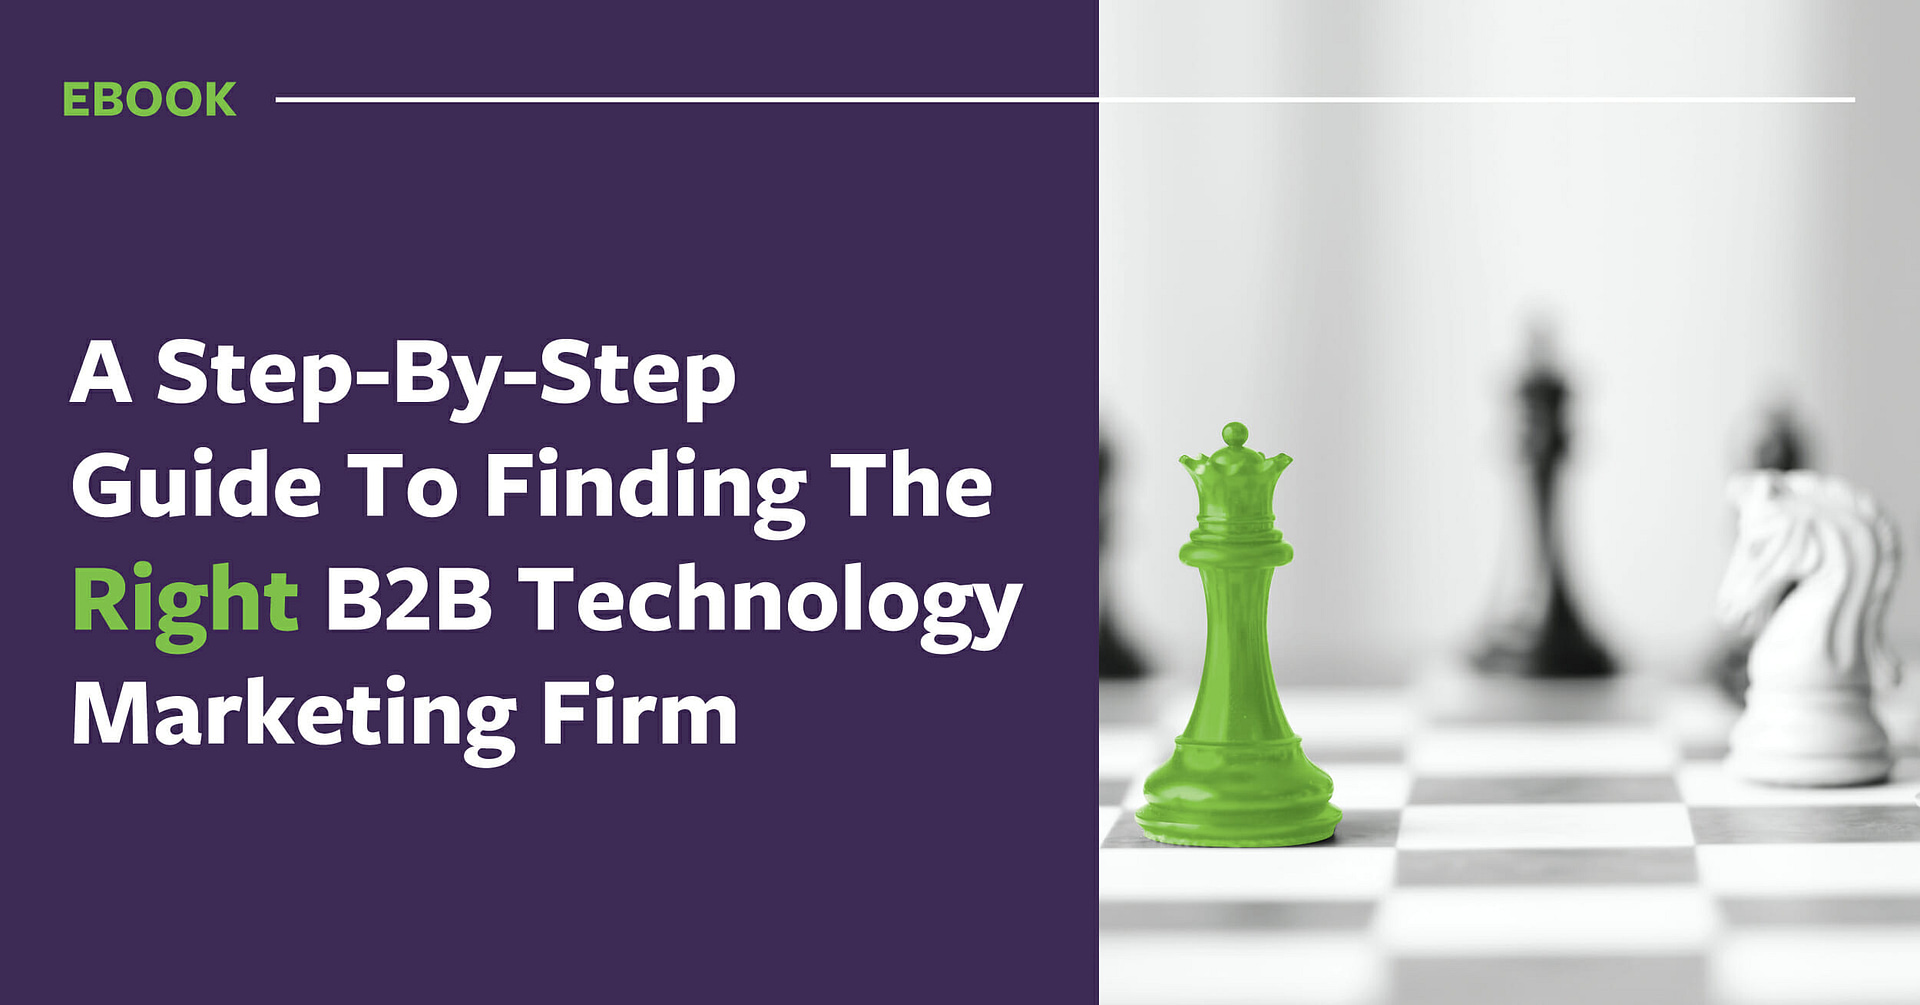 thumbnail image for [eBook] A Step-By-Step Guide To Finding The Right B2B Technology Marketing Firm